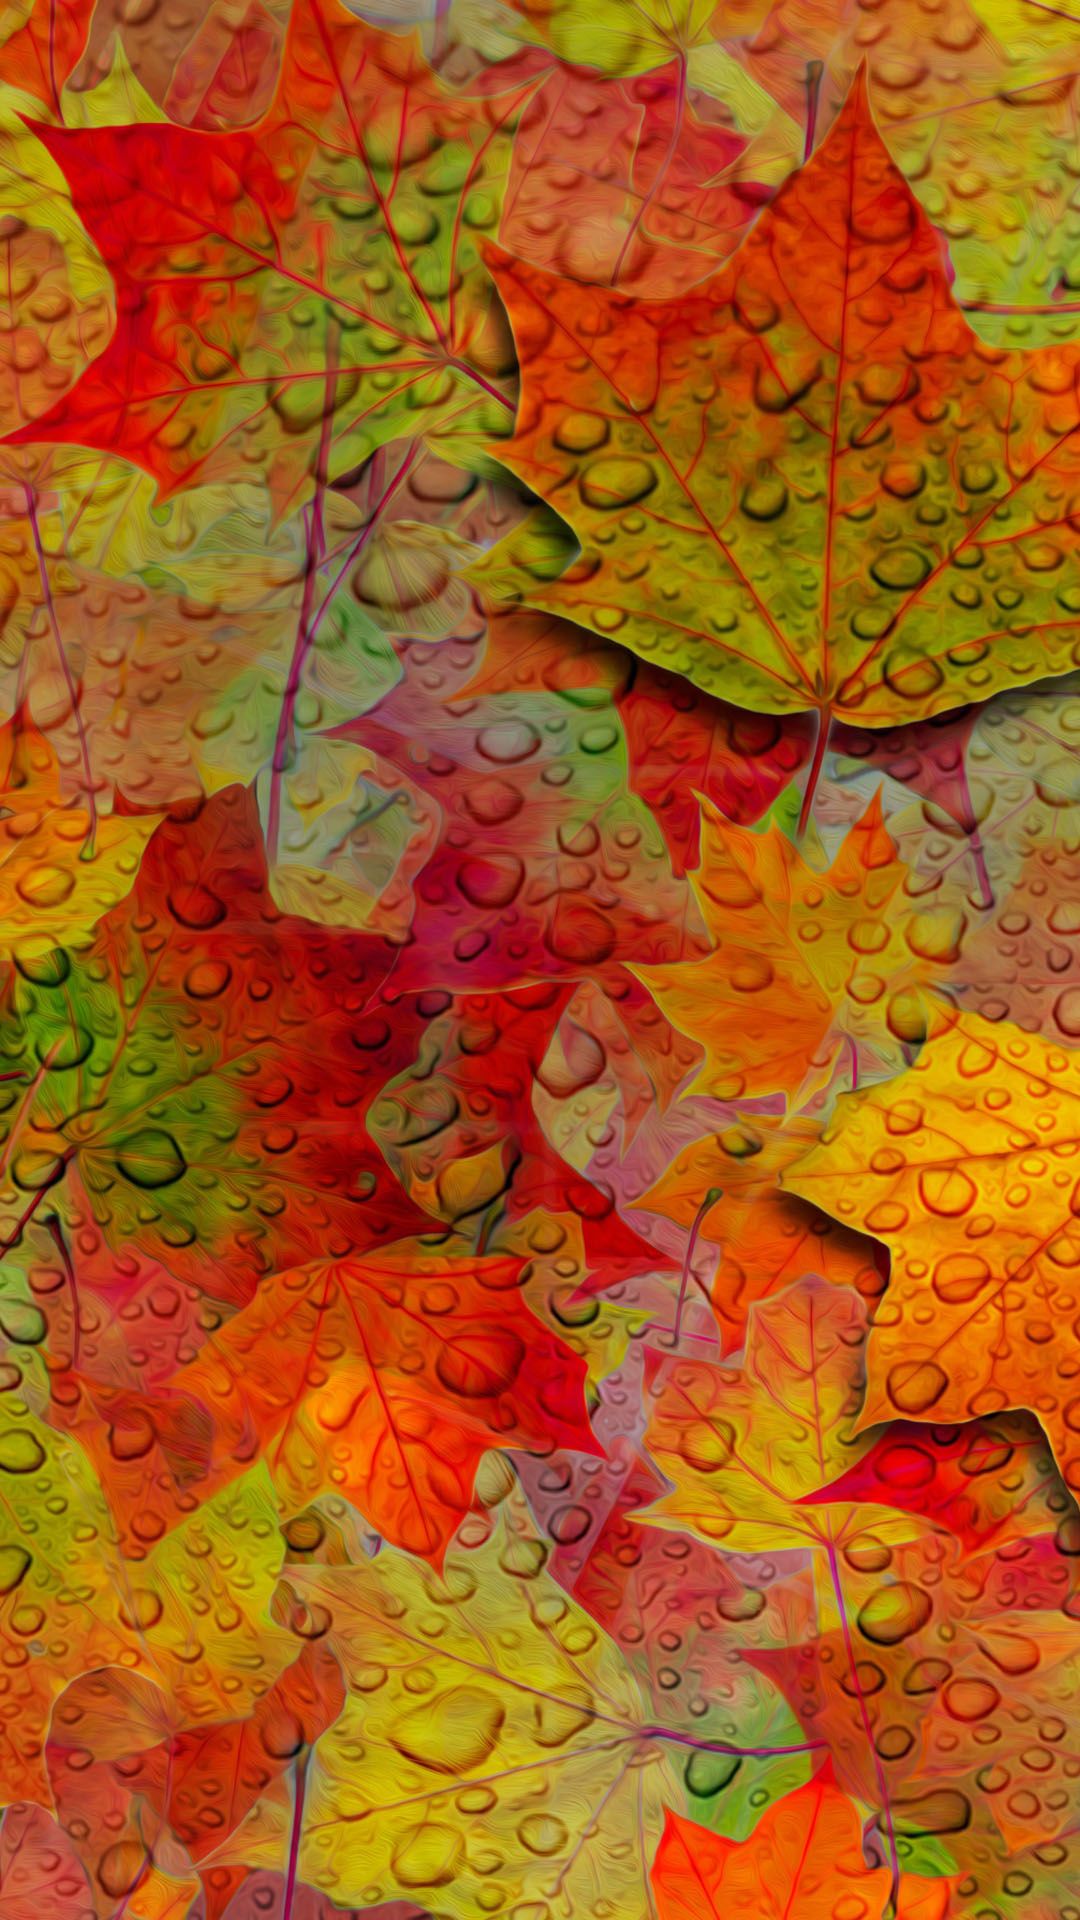 Wallpapers of the week: autumn